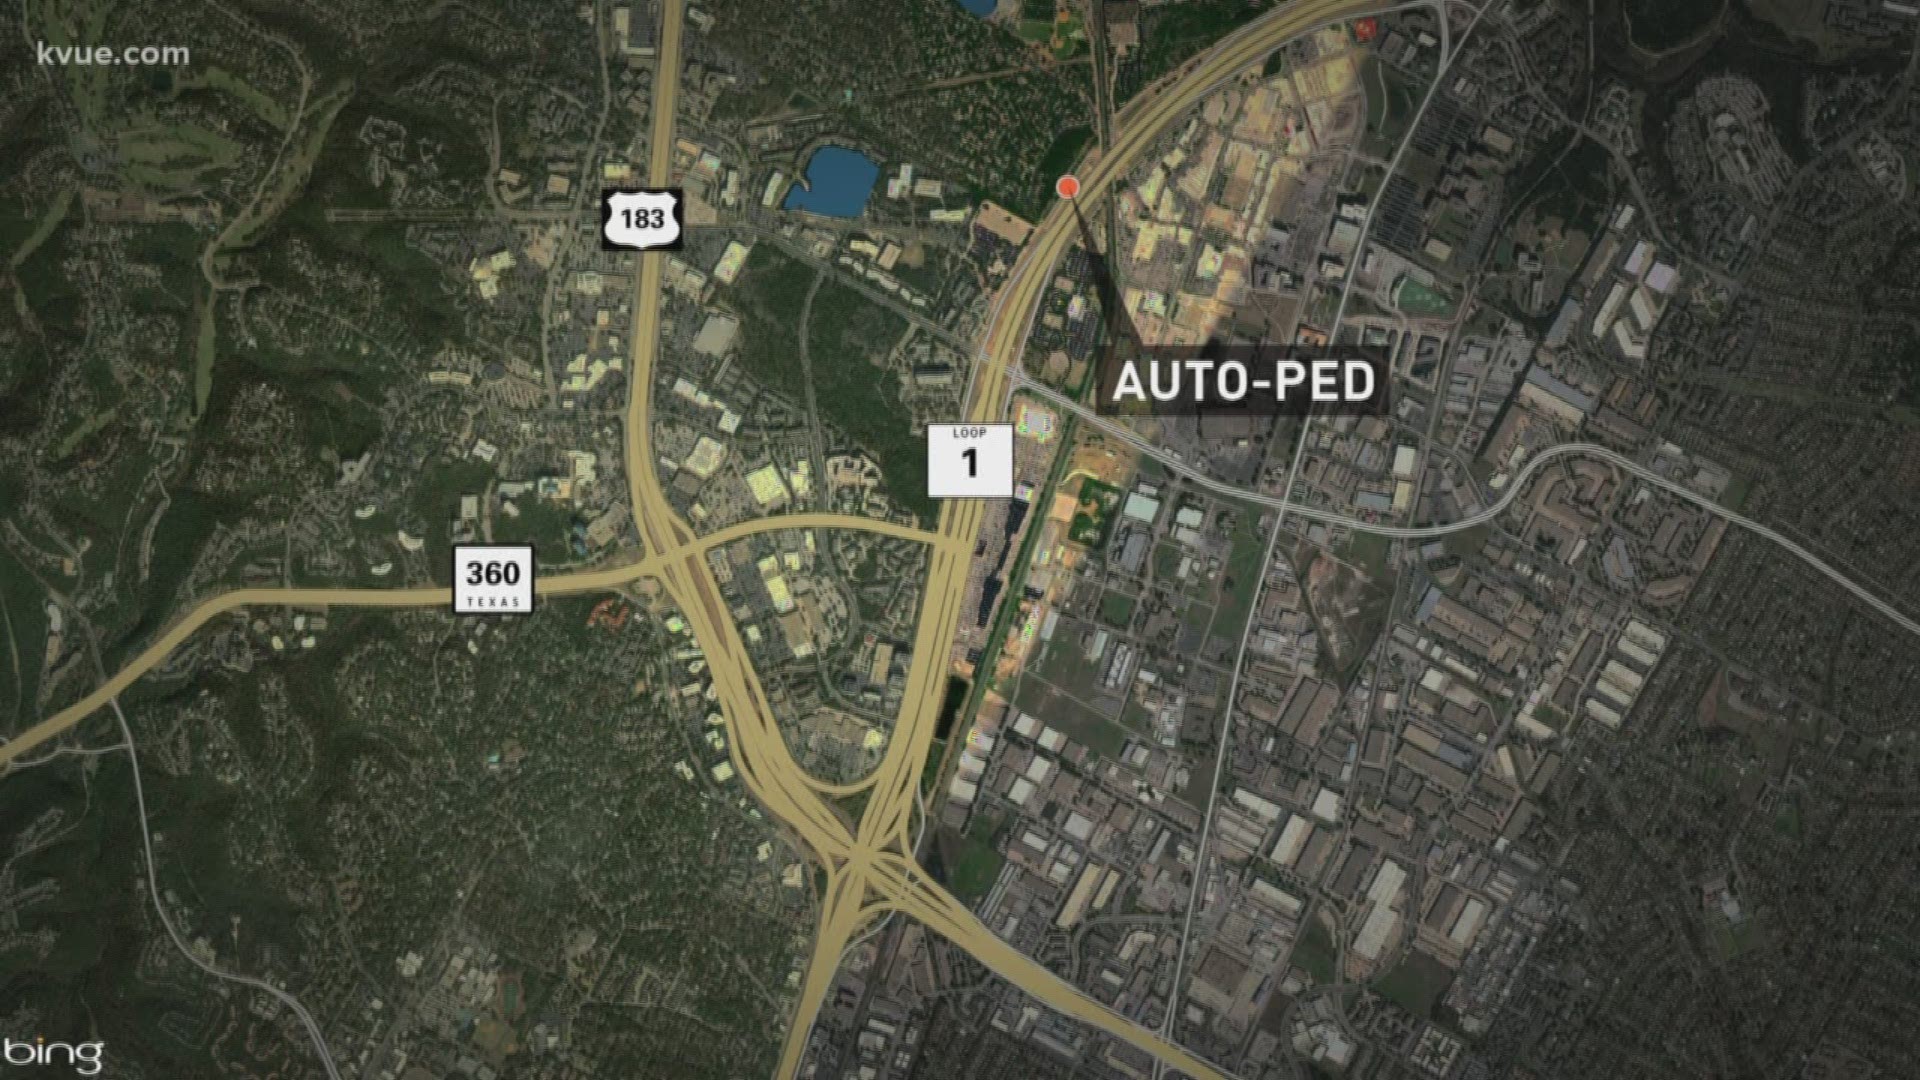 Police said a man in his 40s is dead after trying to cross a major Austin highway. One of the drivers who hit the man took off, police said.